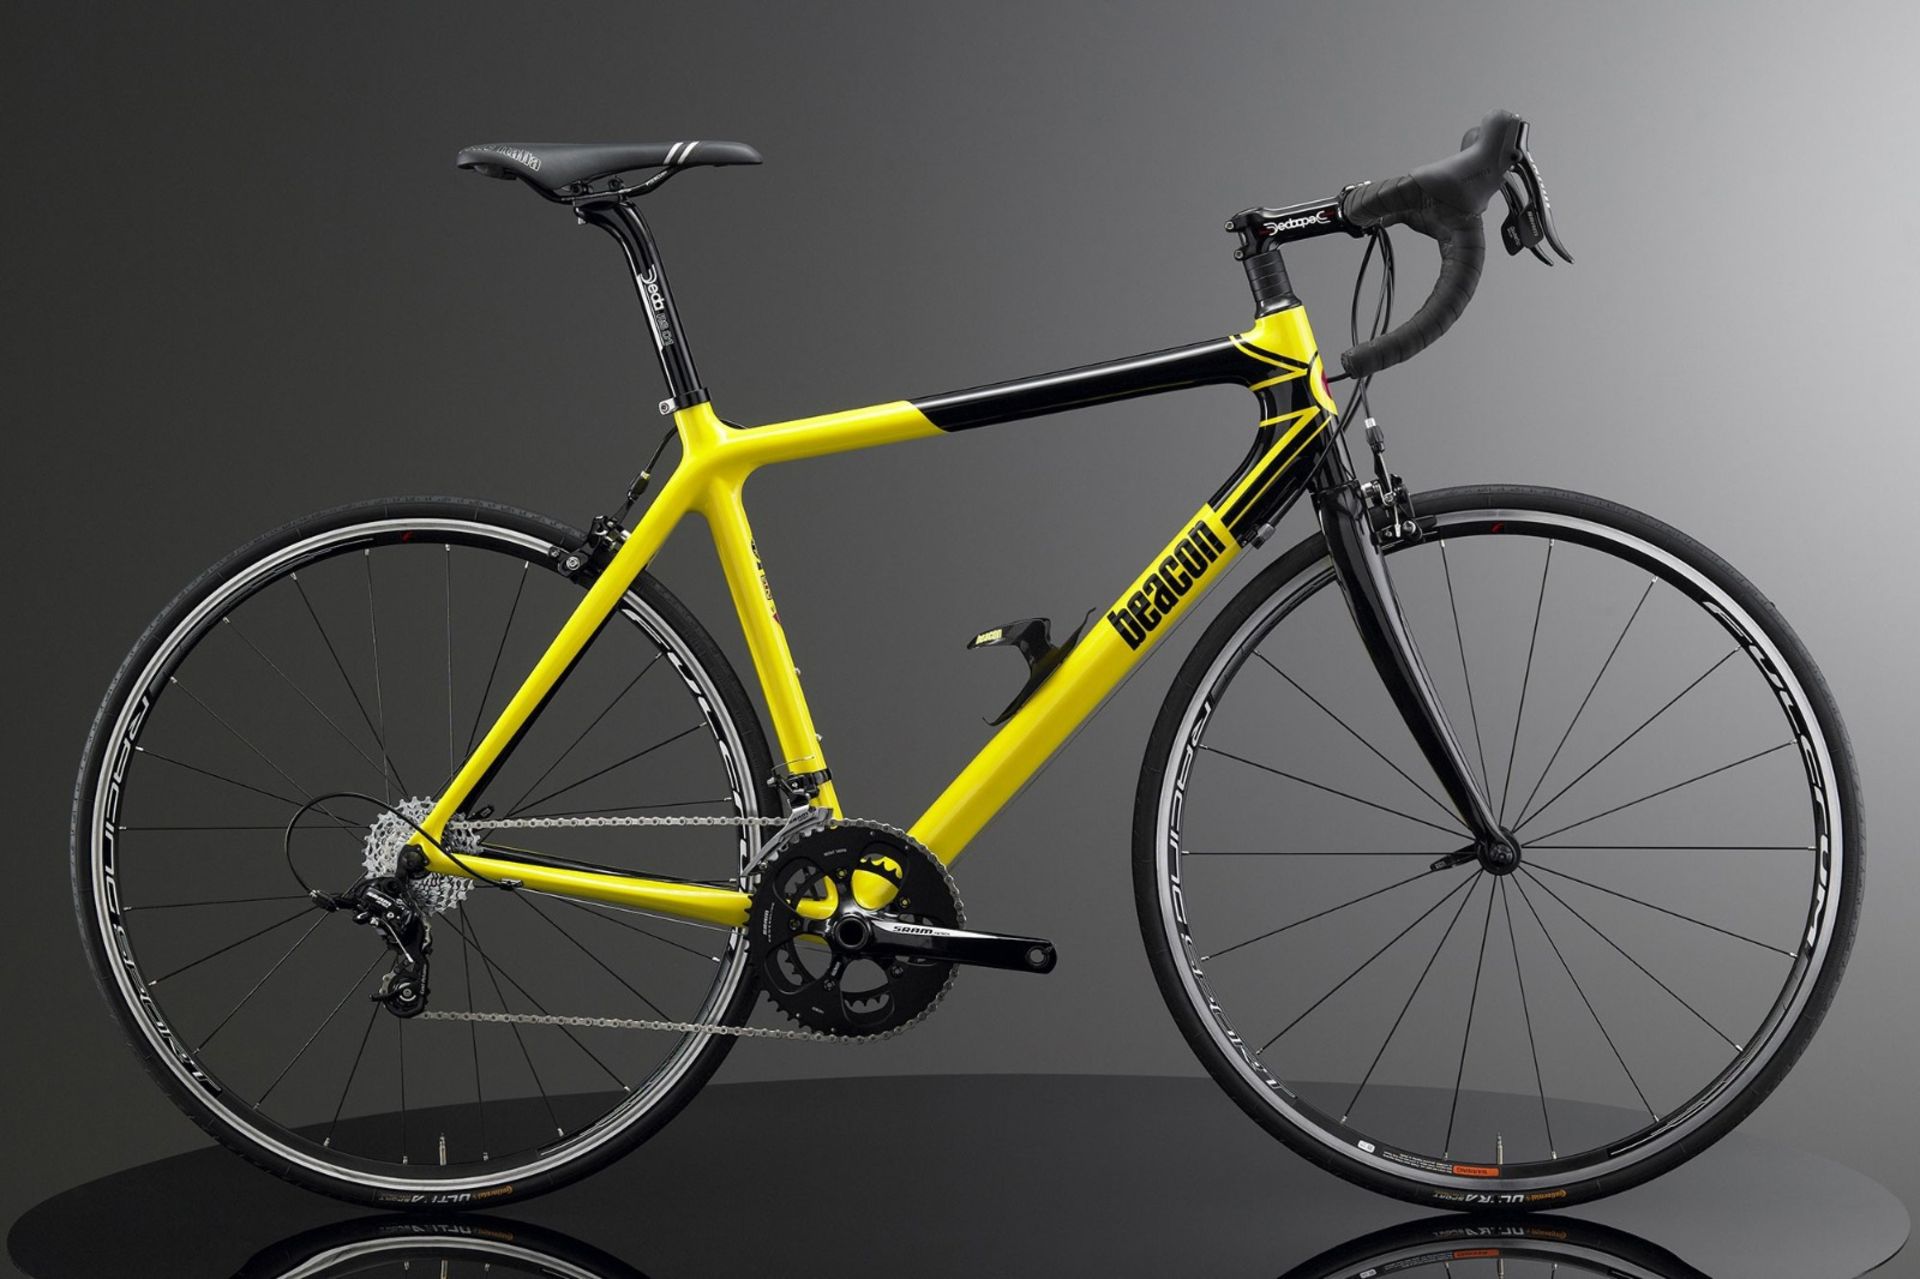 1 x Beacon Model BF-60, Size 520, Carbon Fibre Bike Frame in Yellow & Black. - Image 2 of 3